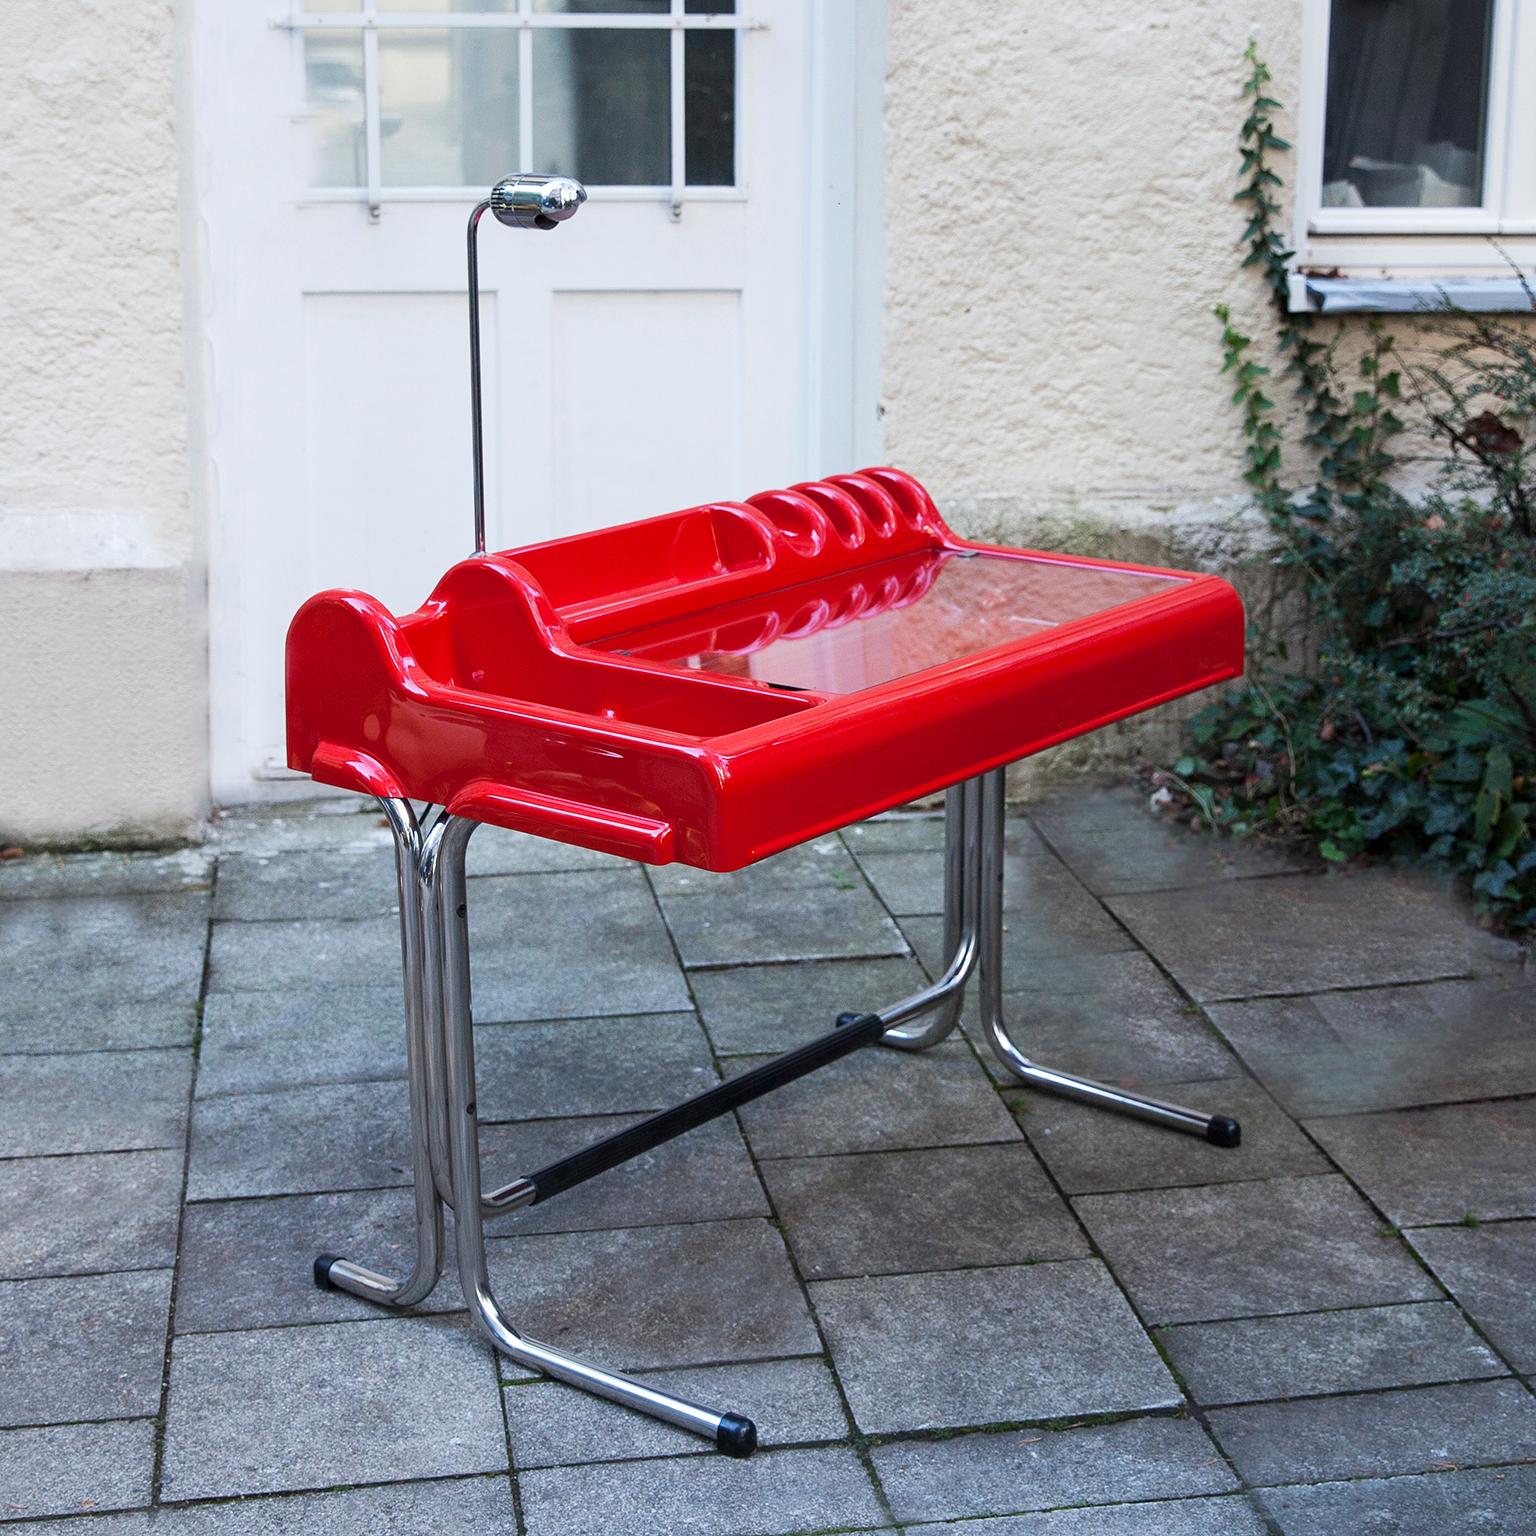 Orix writing desk produced by Molteni in the 1970s and designed by Vittorio Parigi and Nani Prina. The base is made of chromed metal and the top is made of bright red ABS. It features clear glass and a the rare desk lamp. Original manufacture label